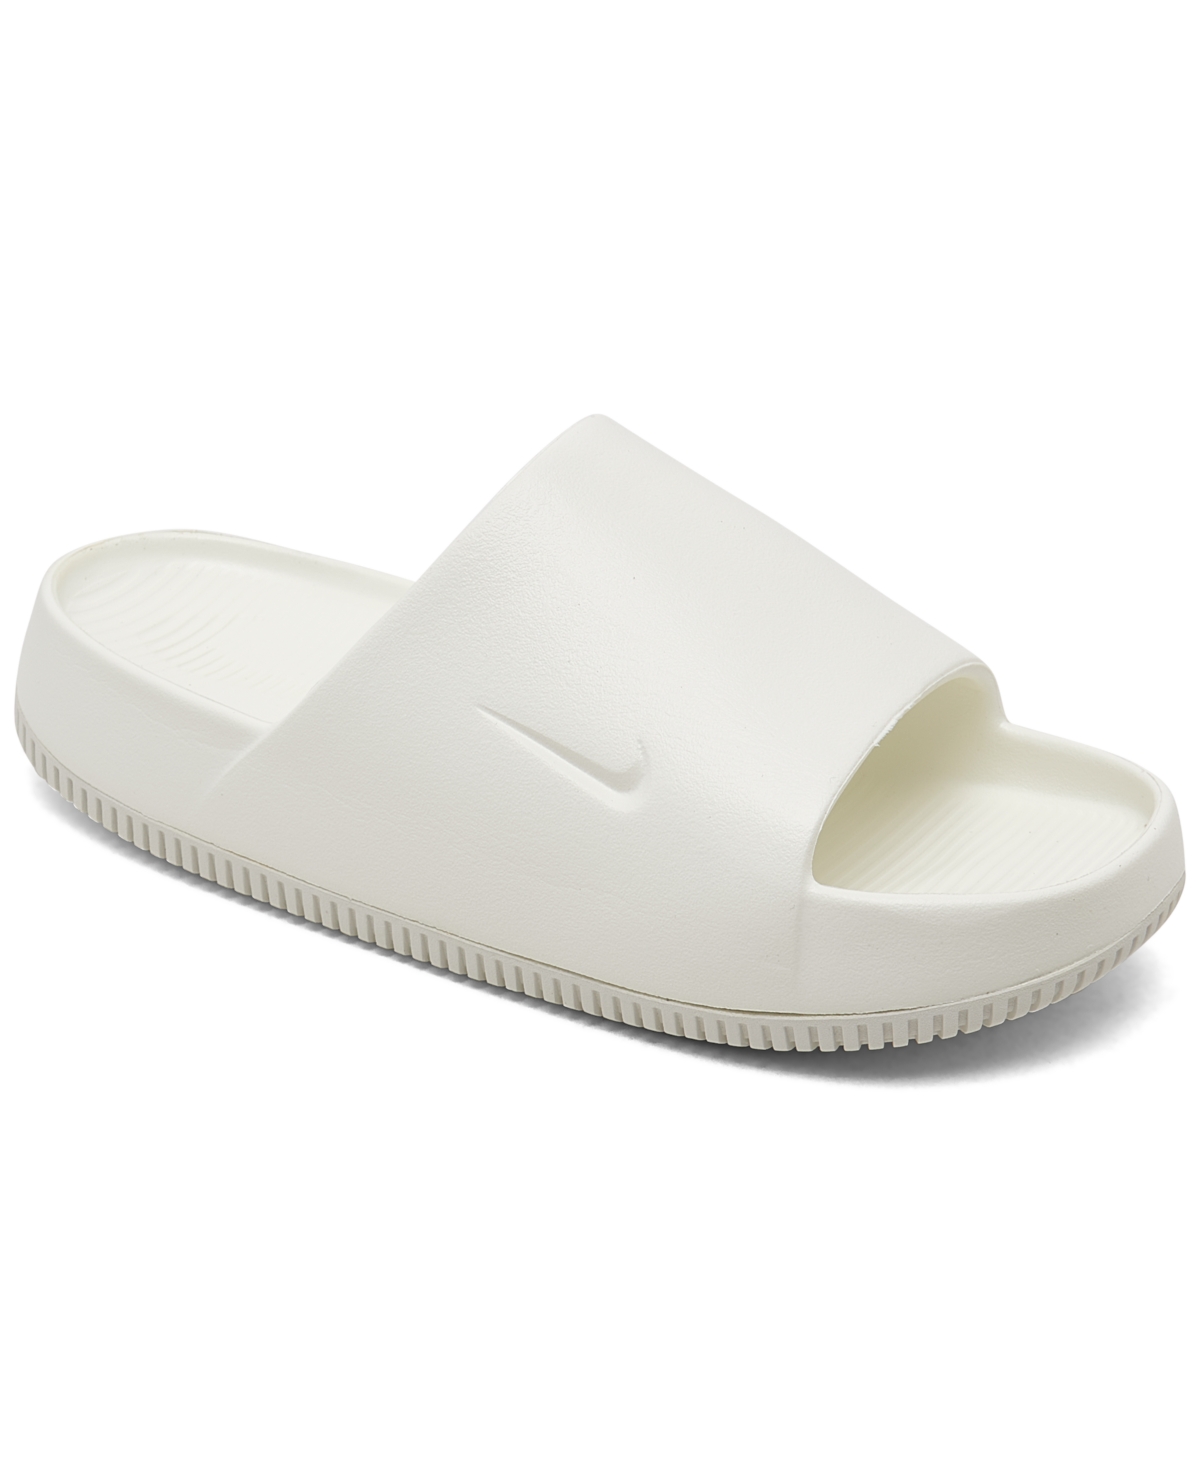 Women's Calm Slide Sandals from Finish Line - Sail